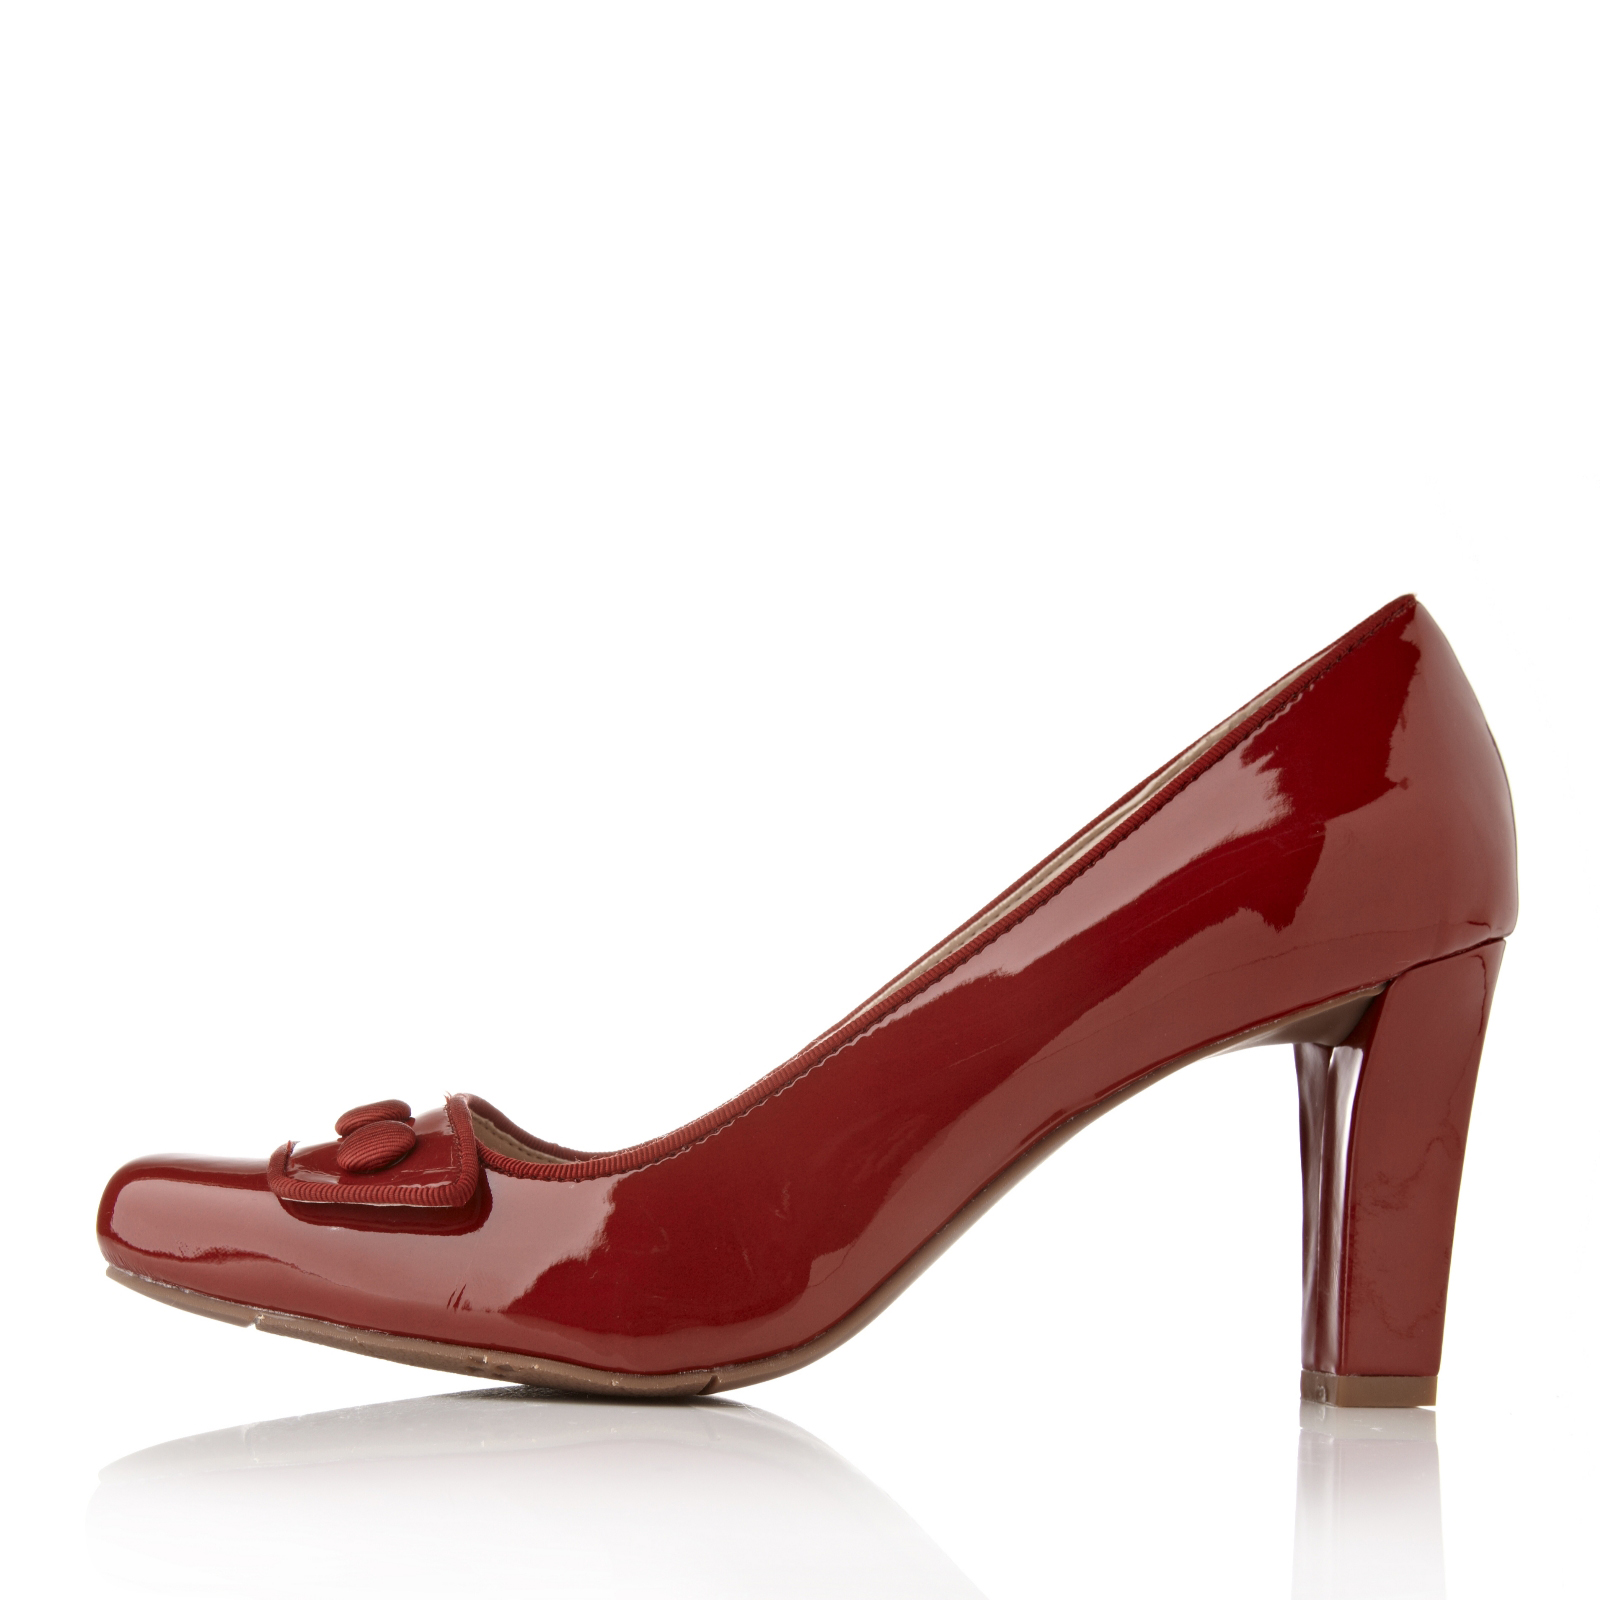 ... pair of red patent courts! Only Â£39.96 from QVC item number 104682